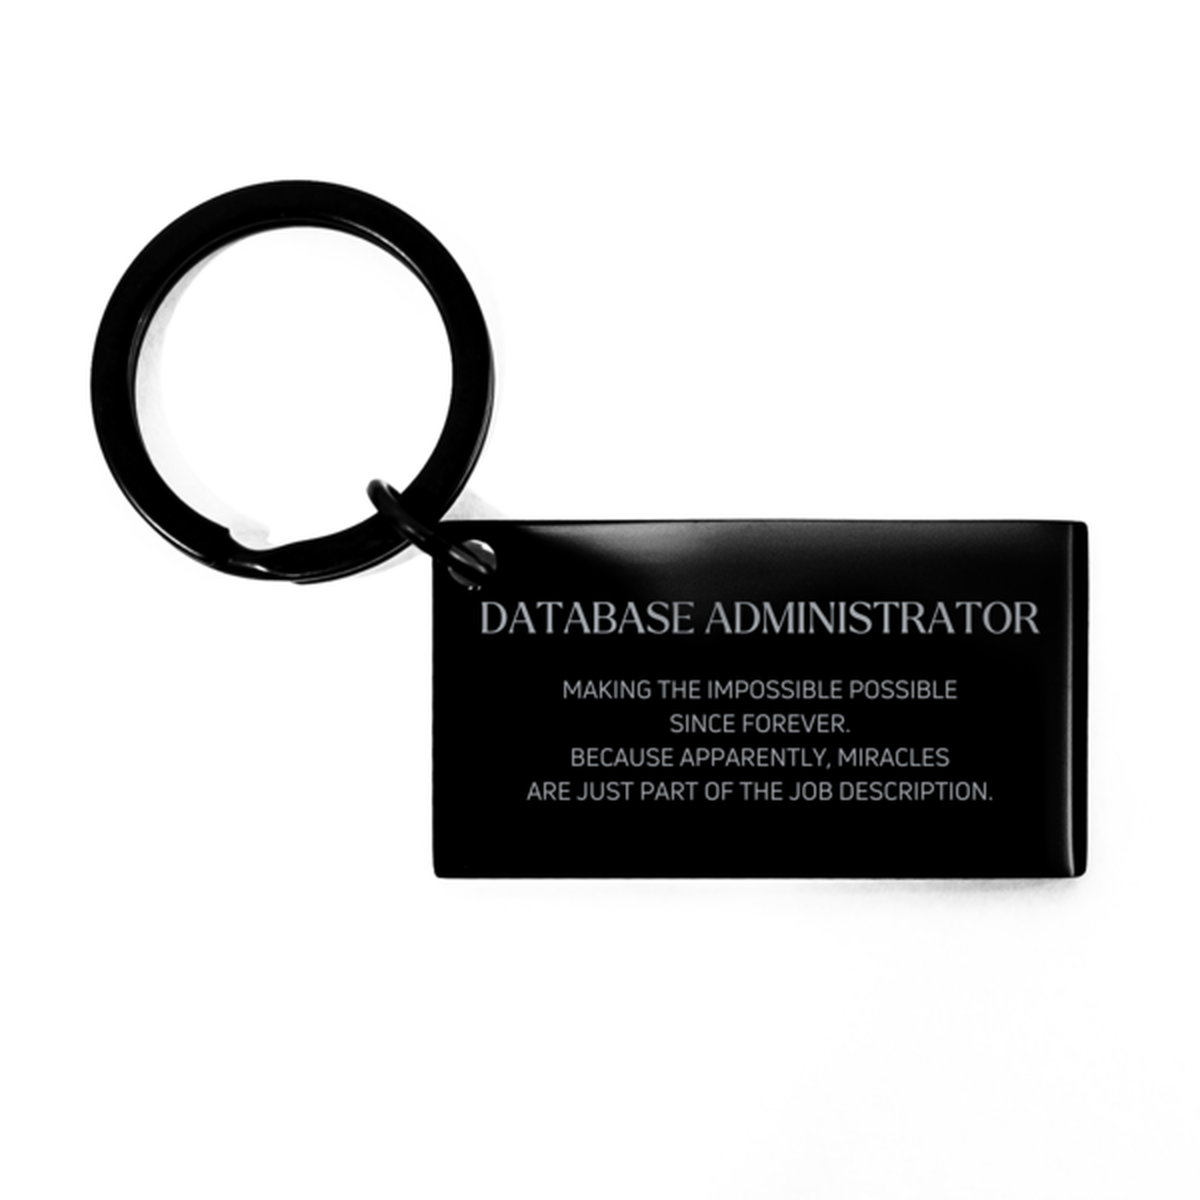 Funny Database Administrator Gifts, Miracles are just part of the job description, Inspirational Birthday Keychain For Database Administrator, Men, Women, Coworkers, Friends, Boss